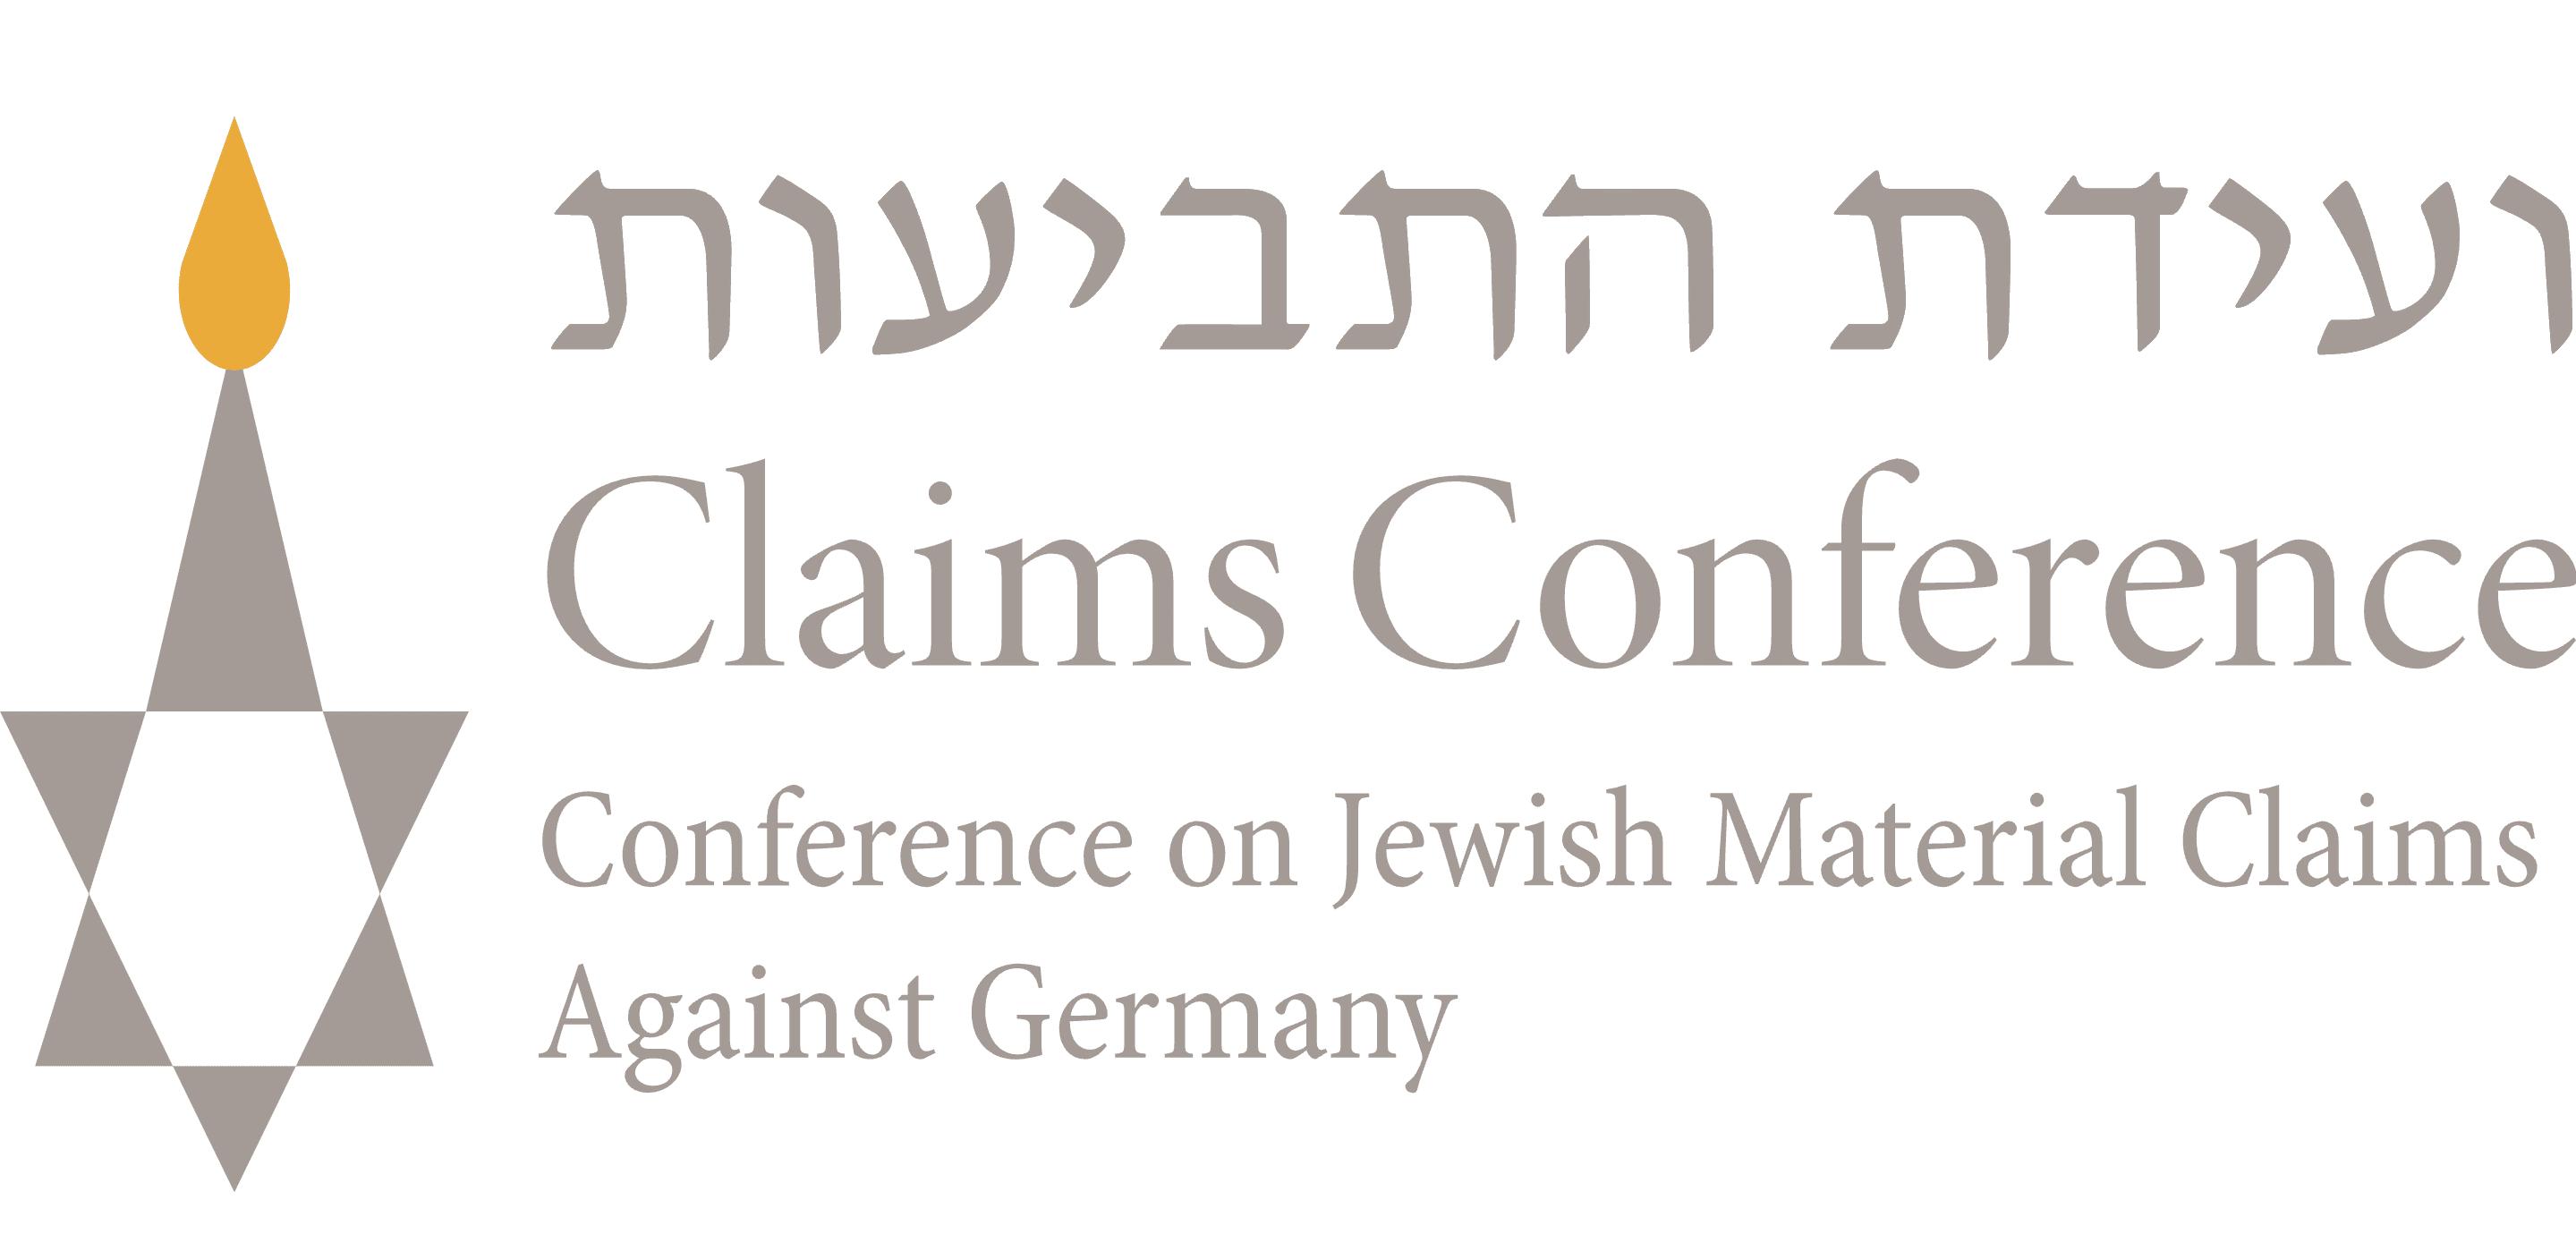 the Claims Conference logo